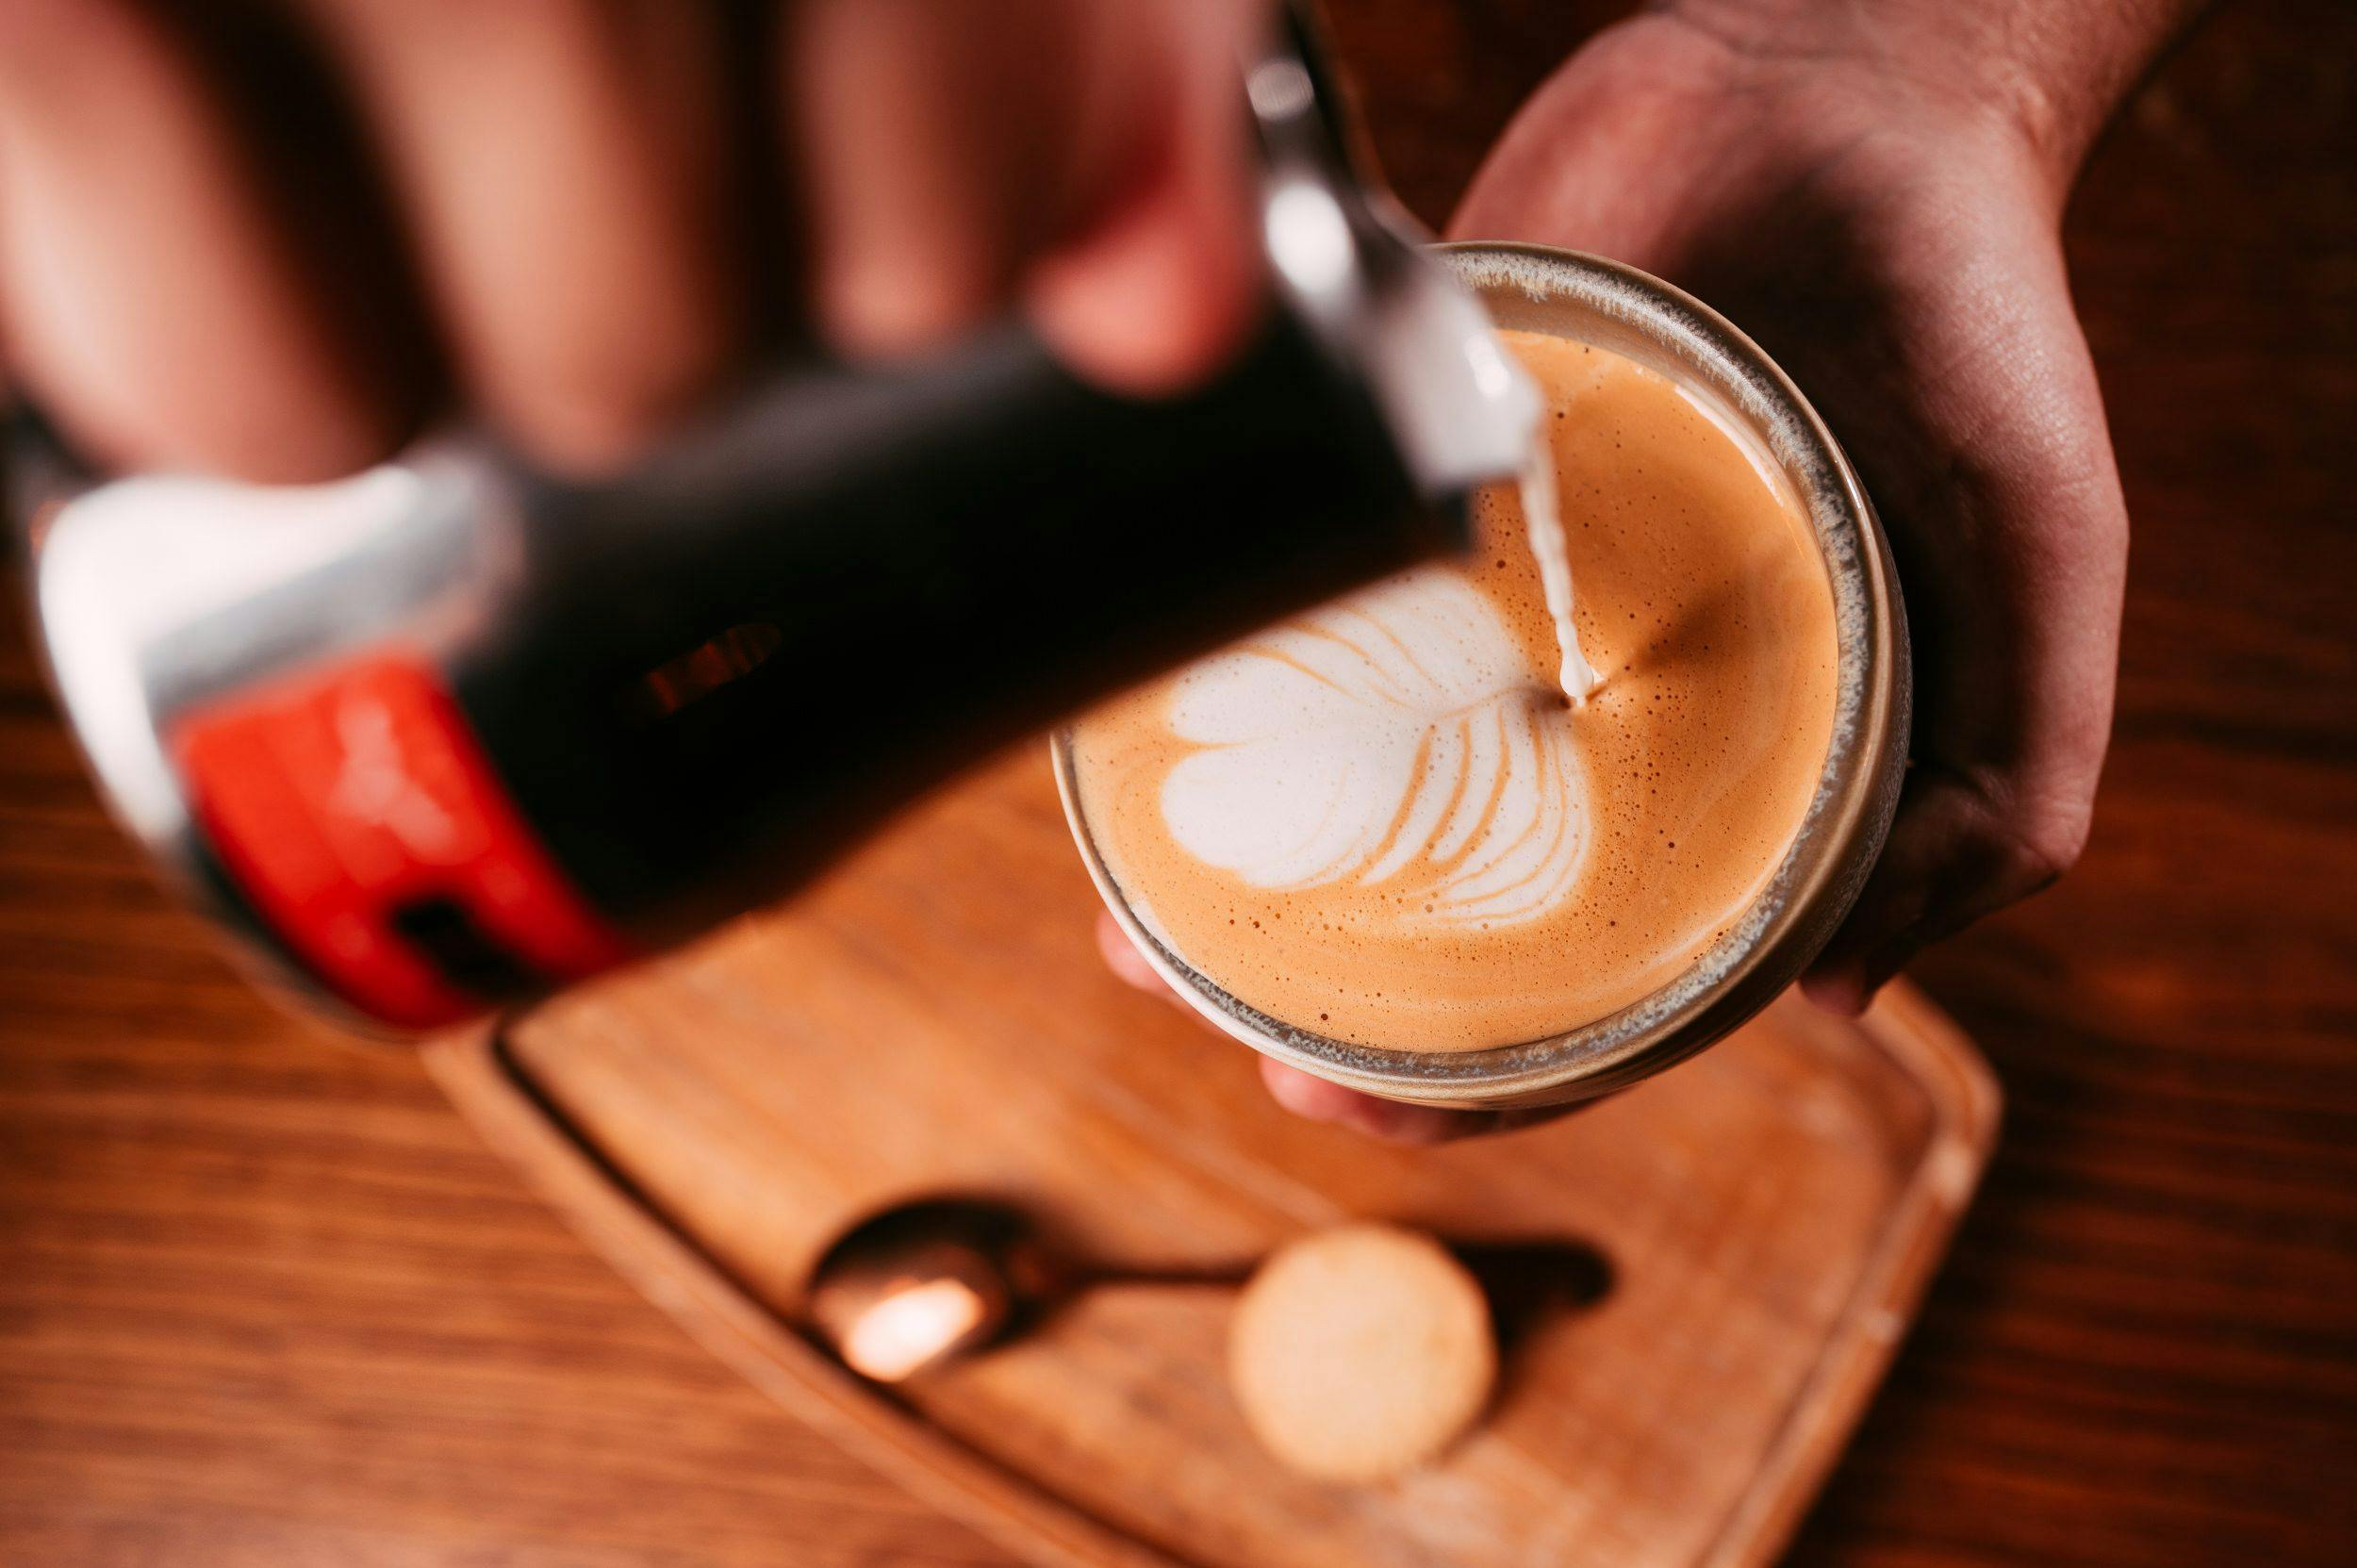 Milk being poured into coffee